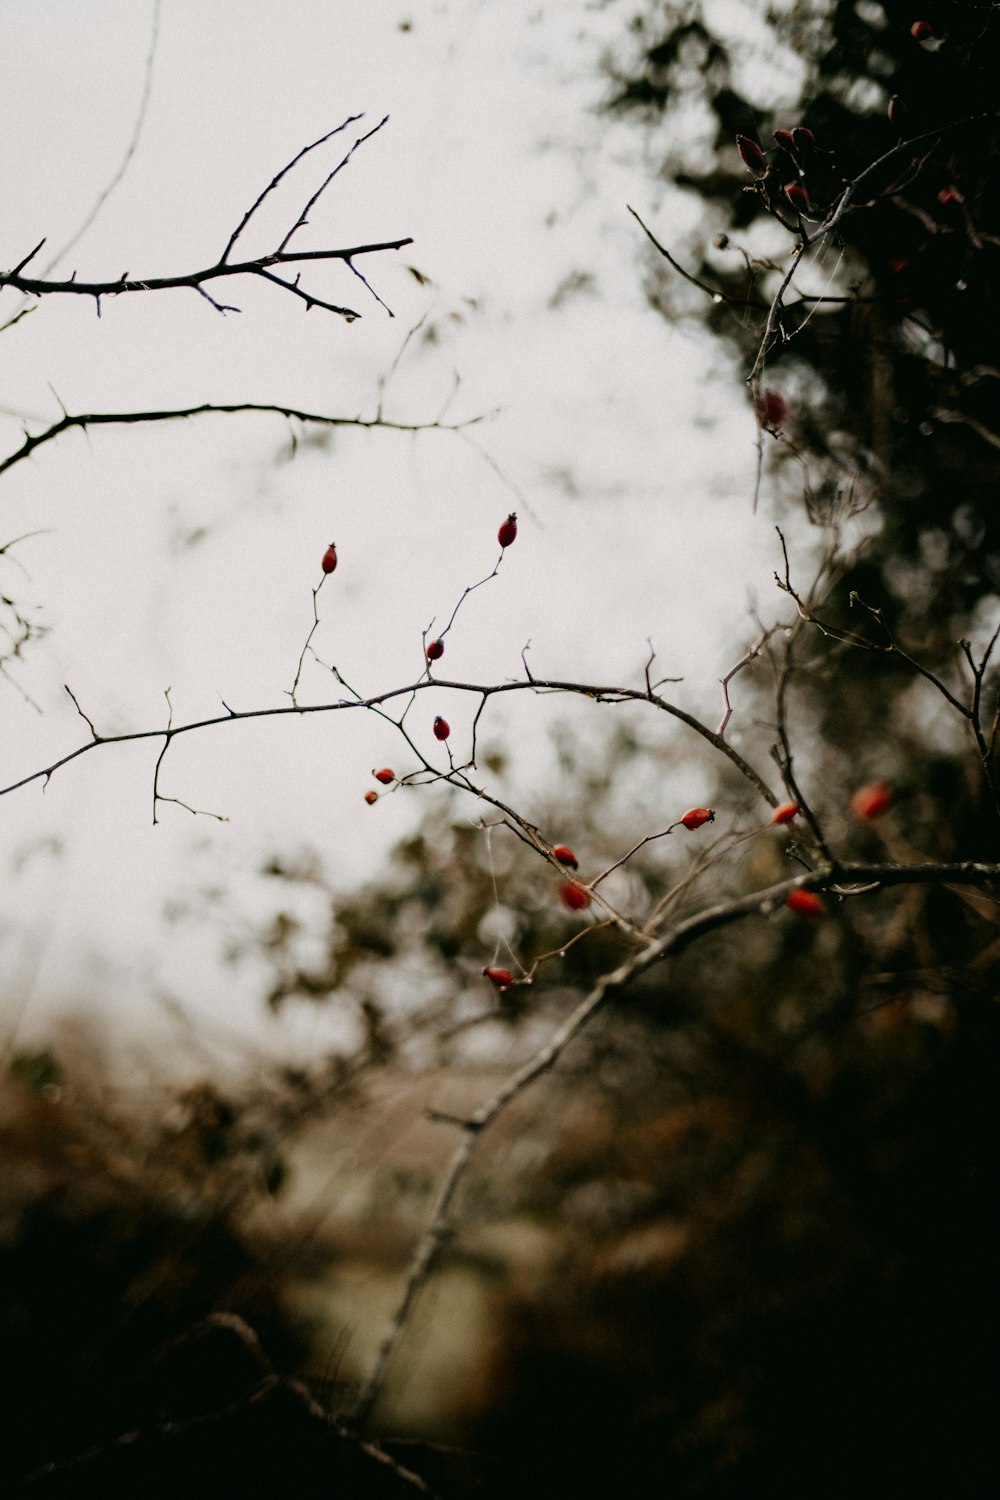 a tree branch with red berries on it